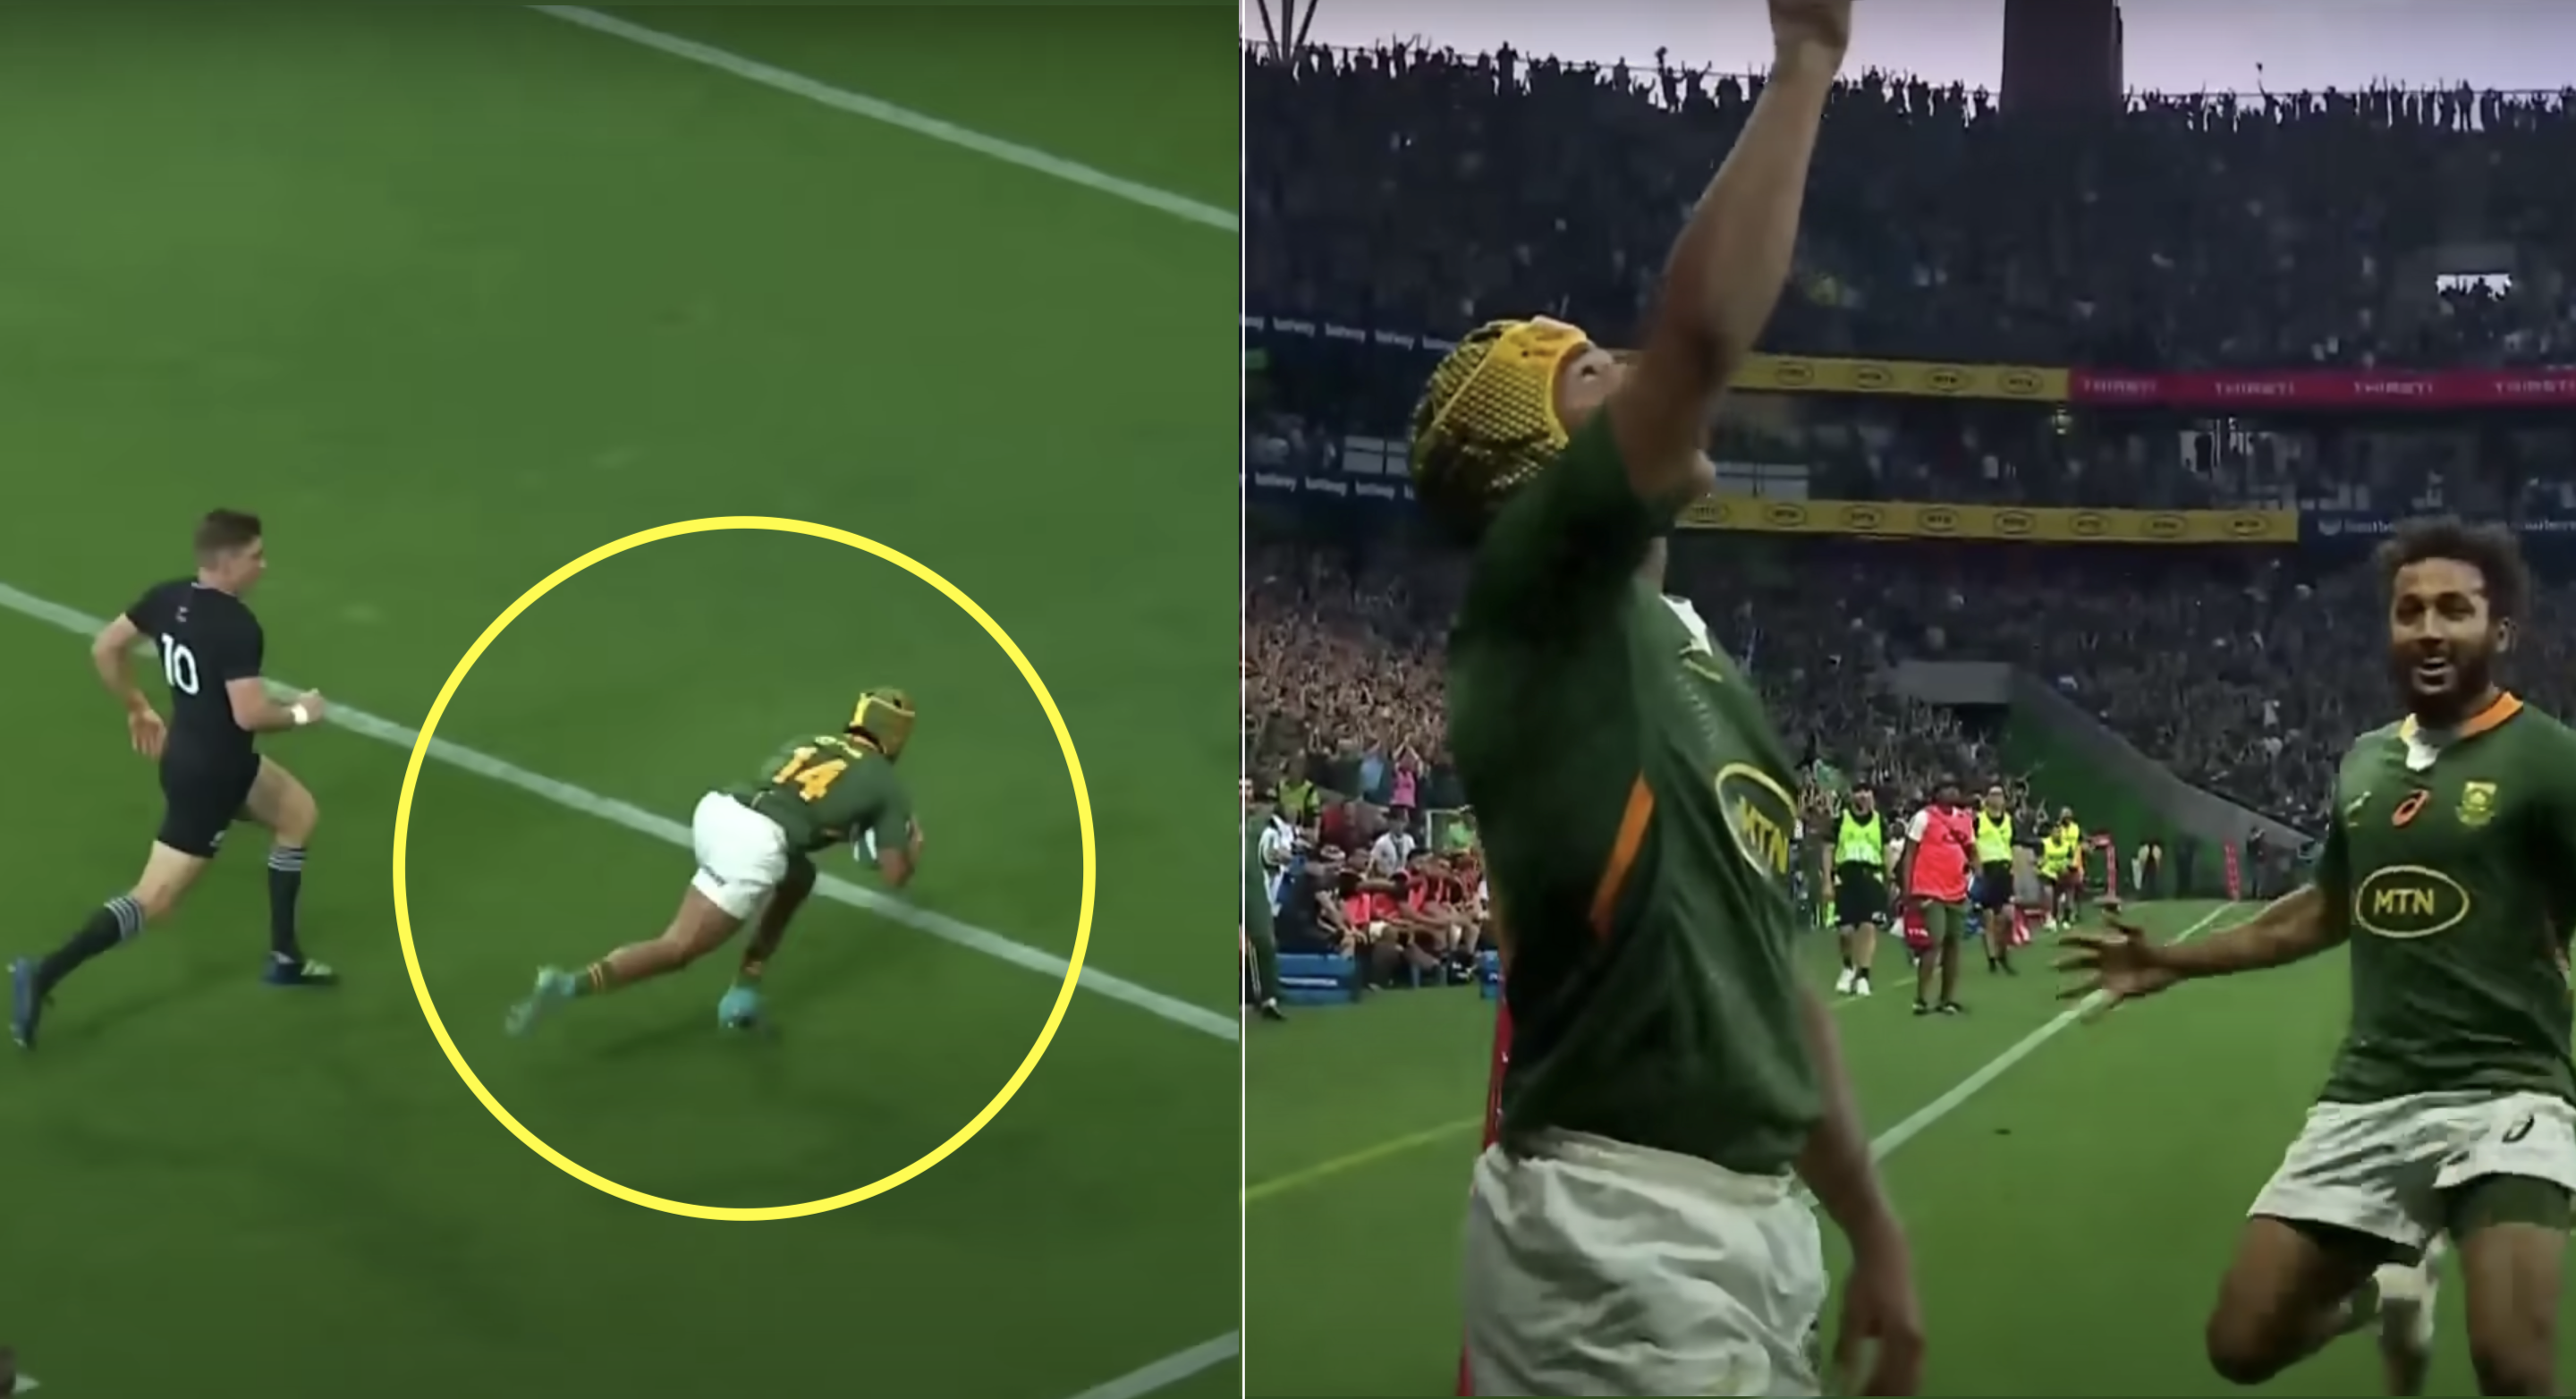 The glaring Bok mistake the officials missed in the build up to their first try